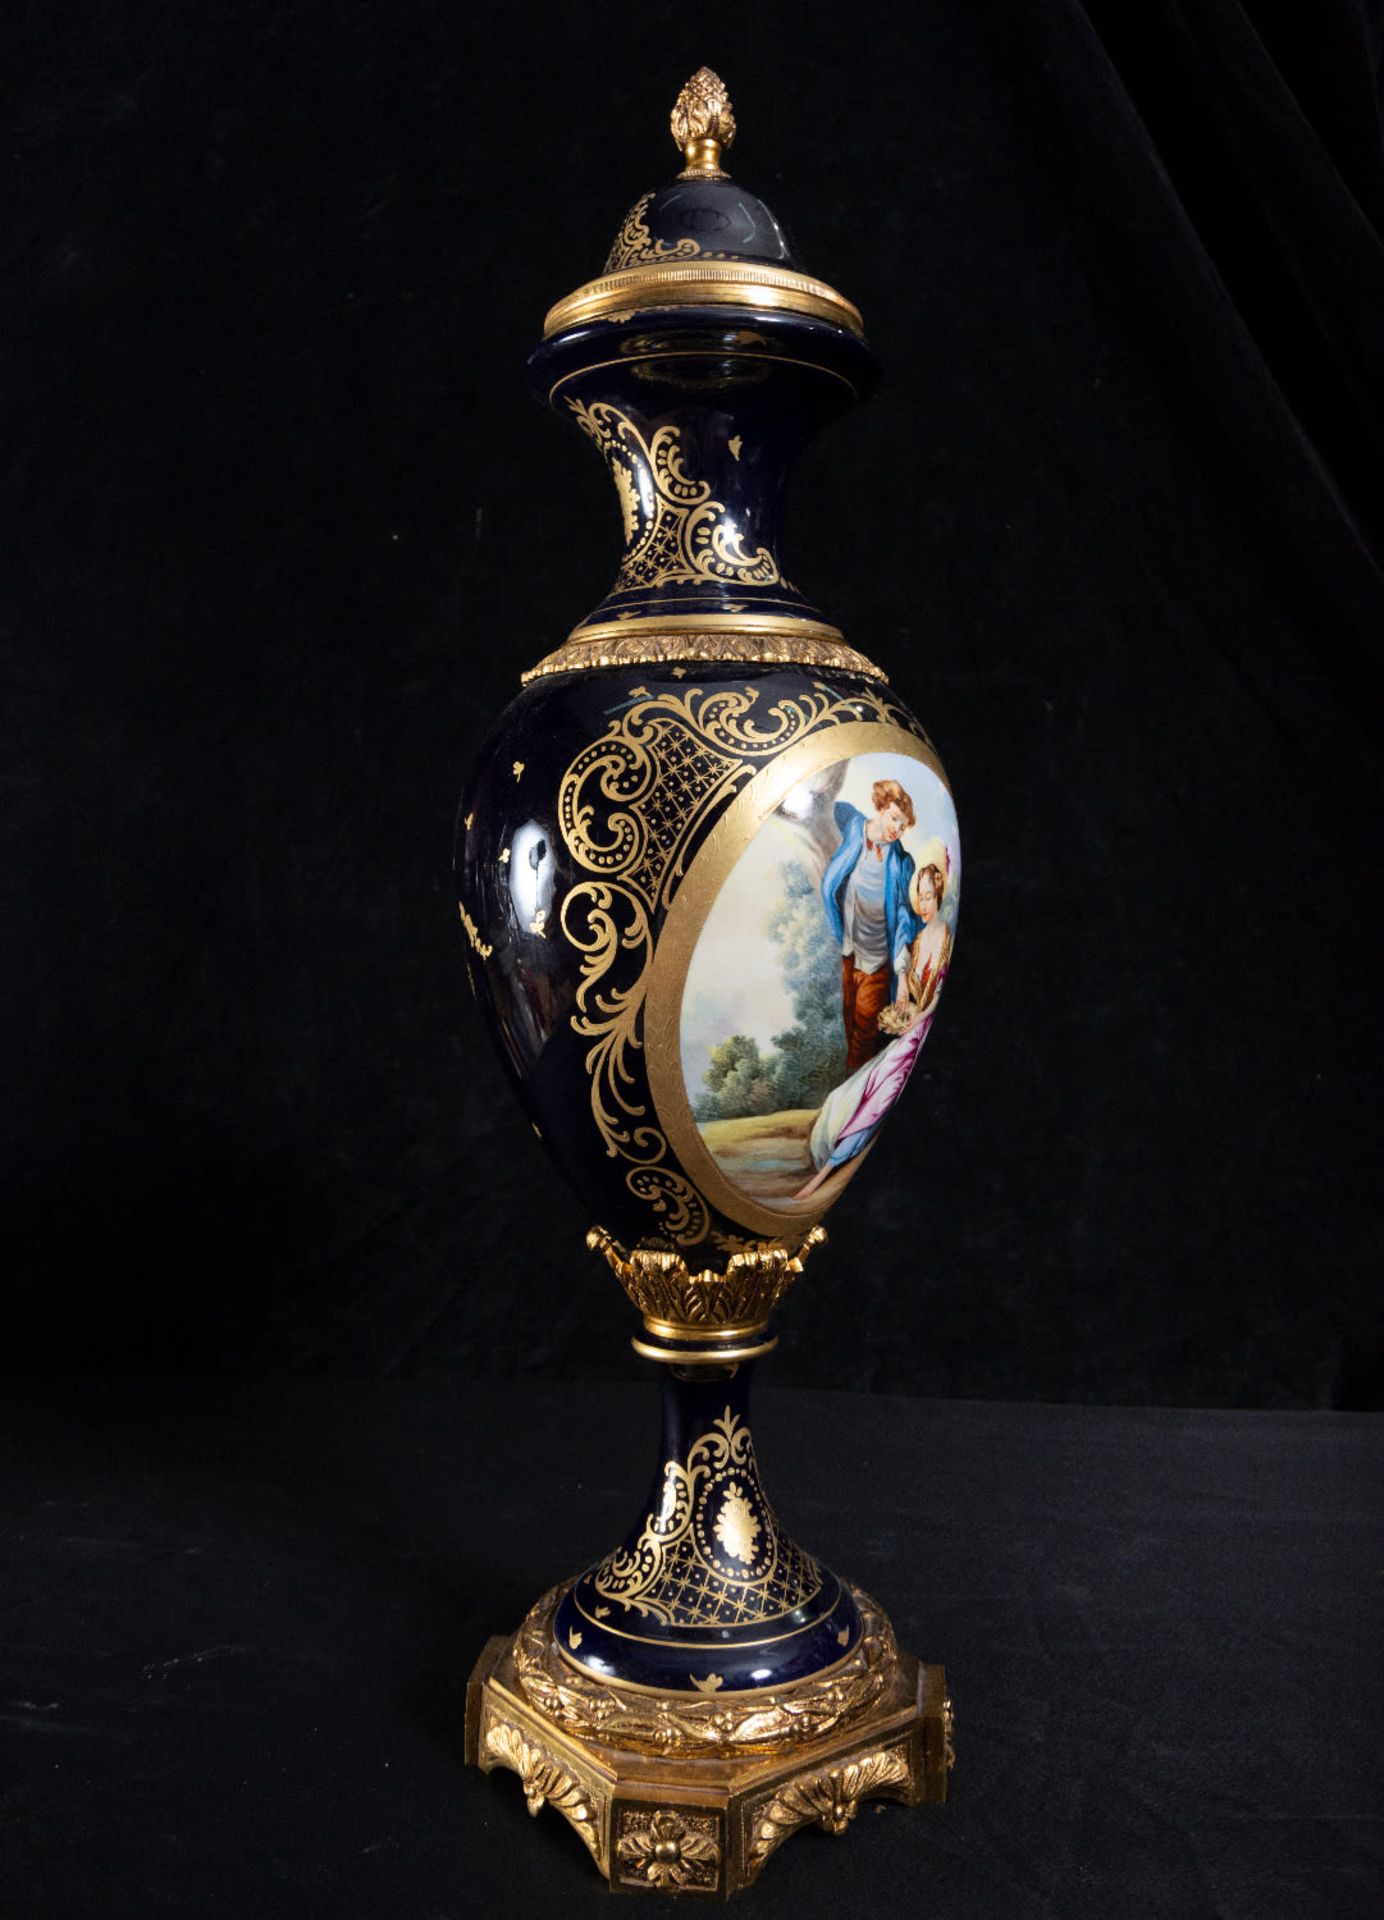 Great pair of French porcelain vases "Sevres Blue", mounted in gilt bronze, late 19th century - Image 3 of 6